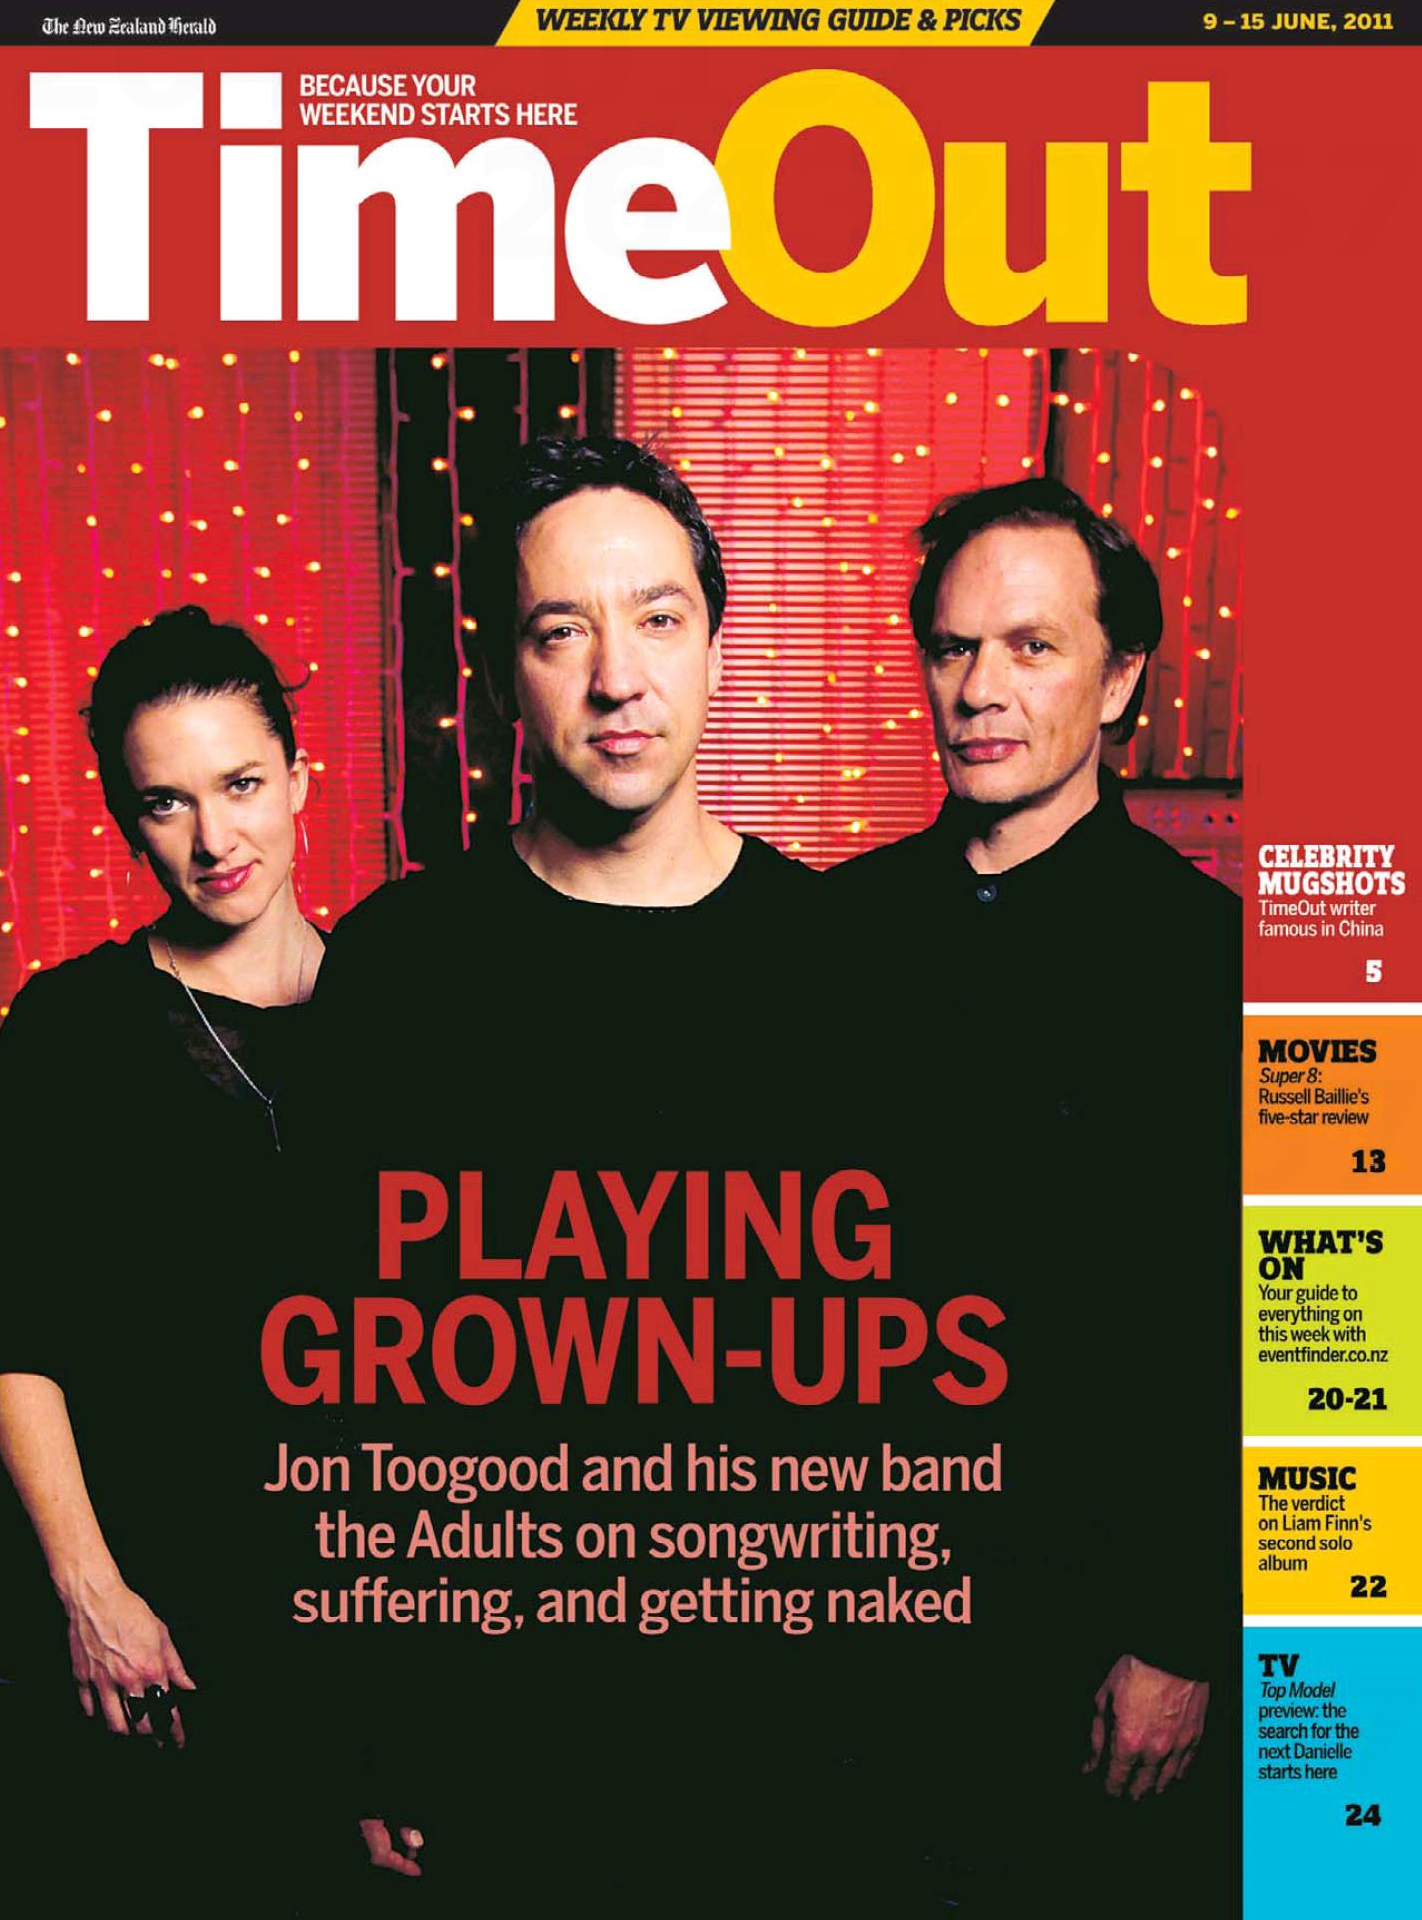 Timeout cover 9 June 2011.jpg